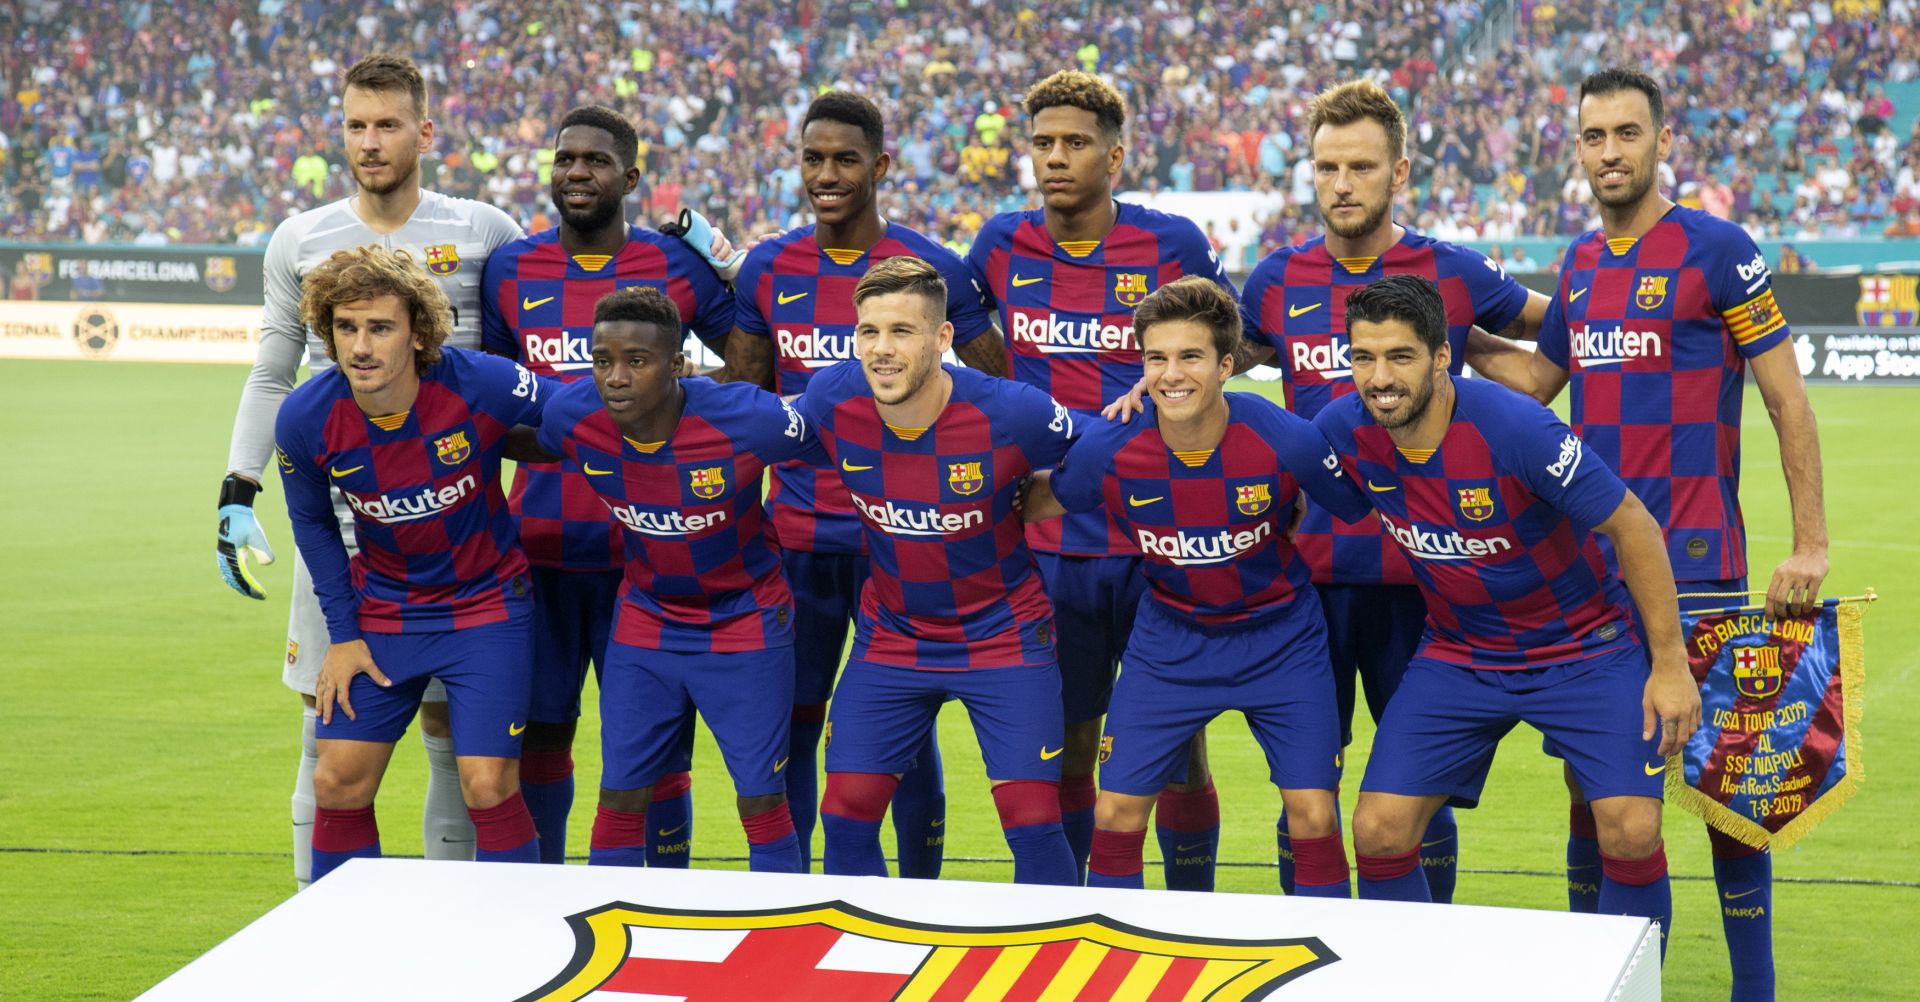 epa07761396 FC Barcelona team members pose for a photograph before the friendly soccer match between SSC Napoli and FC Barcelona at the Hard Rock Stadium in Miami, Florida, USA, 07 August 2019.  EPA/CRISTOBAL HERRERA